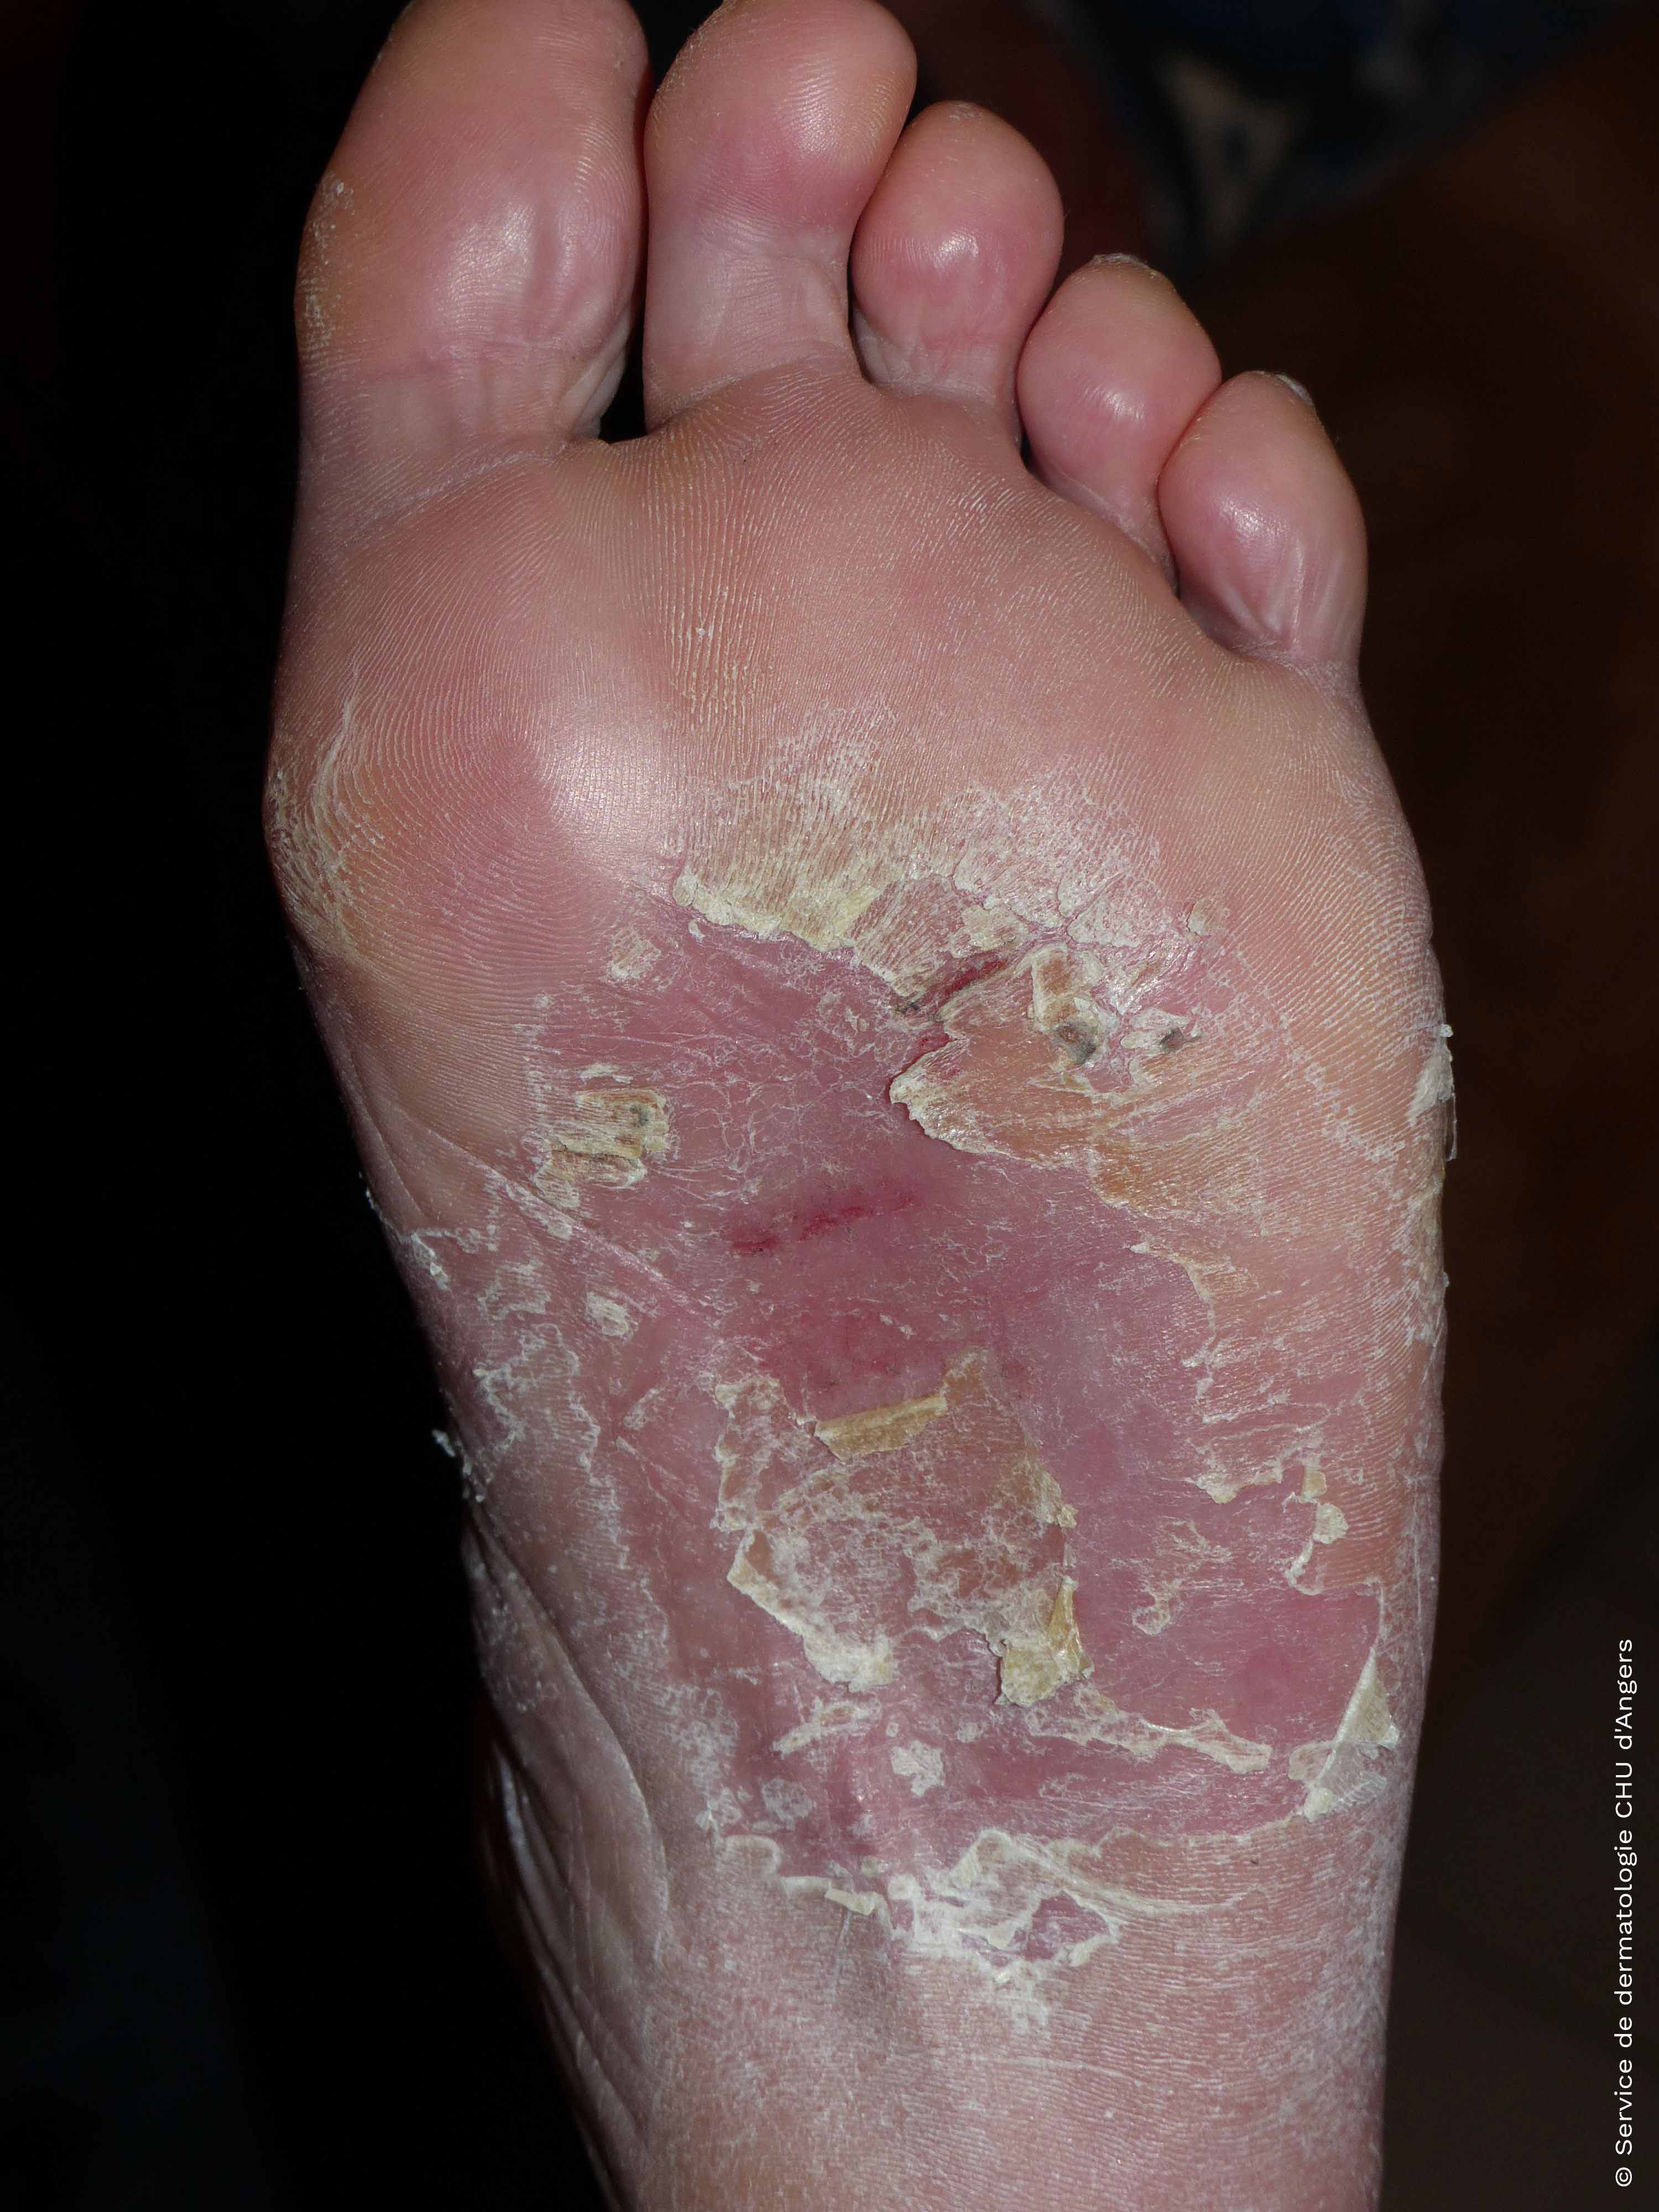 Contact eczema of the feet with glue and shoe leather